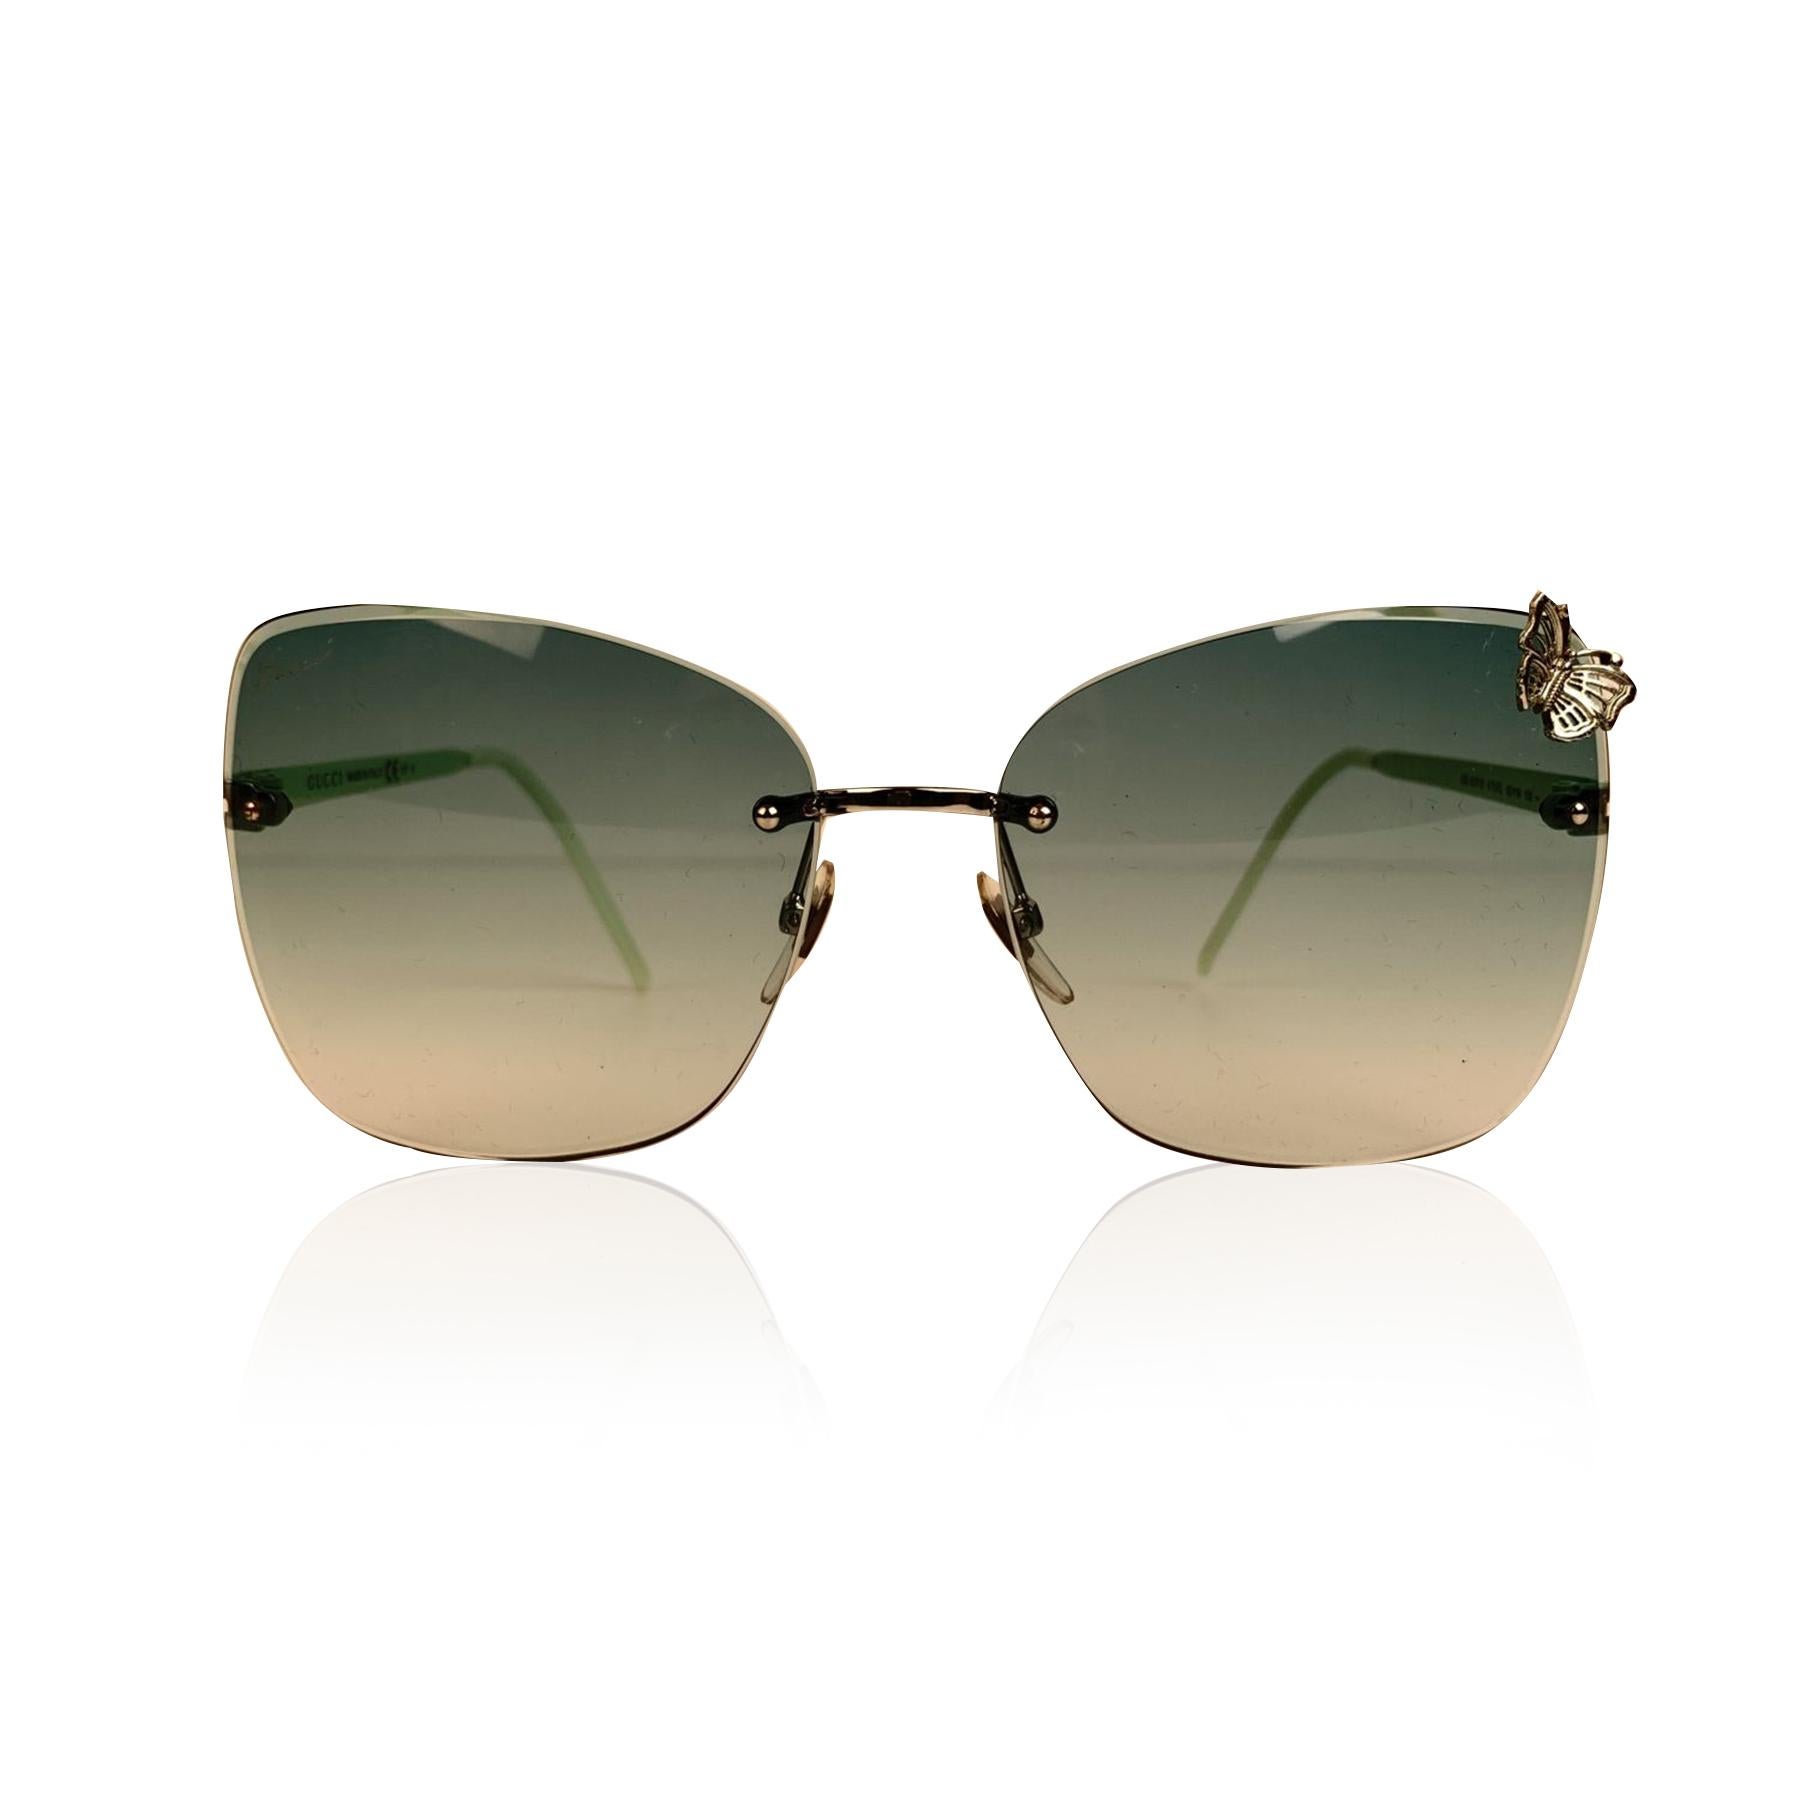 Gucci rimless sunglasses, mod. GG 4217/S. Silver metal Butterfly detailing on left corner. Gradient green lenses. Gucci.ignature on temples. Made in Italy. Style & refs: GG 4217/s - KTU7L - 62/16 - 130

Details

MATERIAL: Acetate

COLOR: